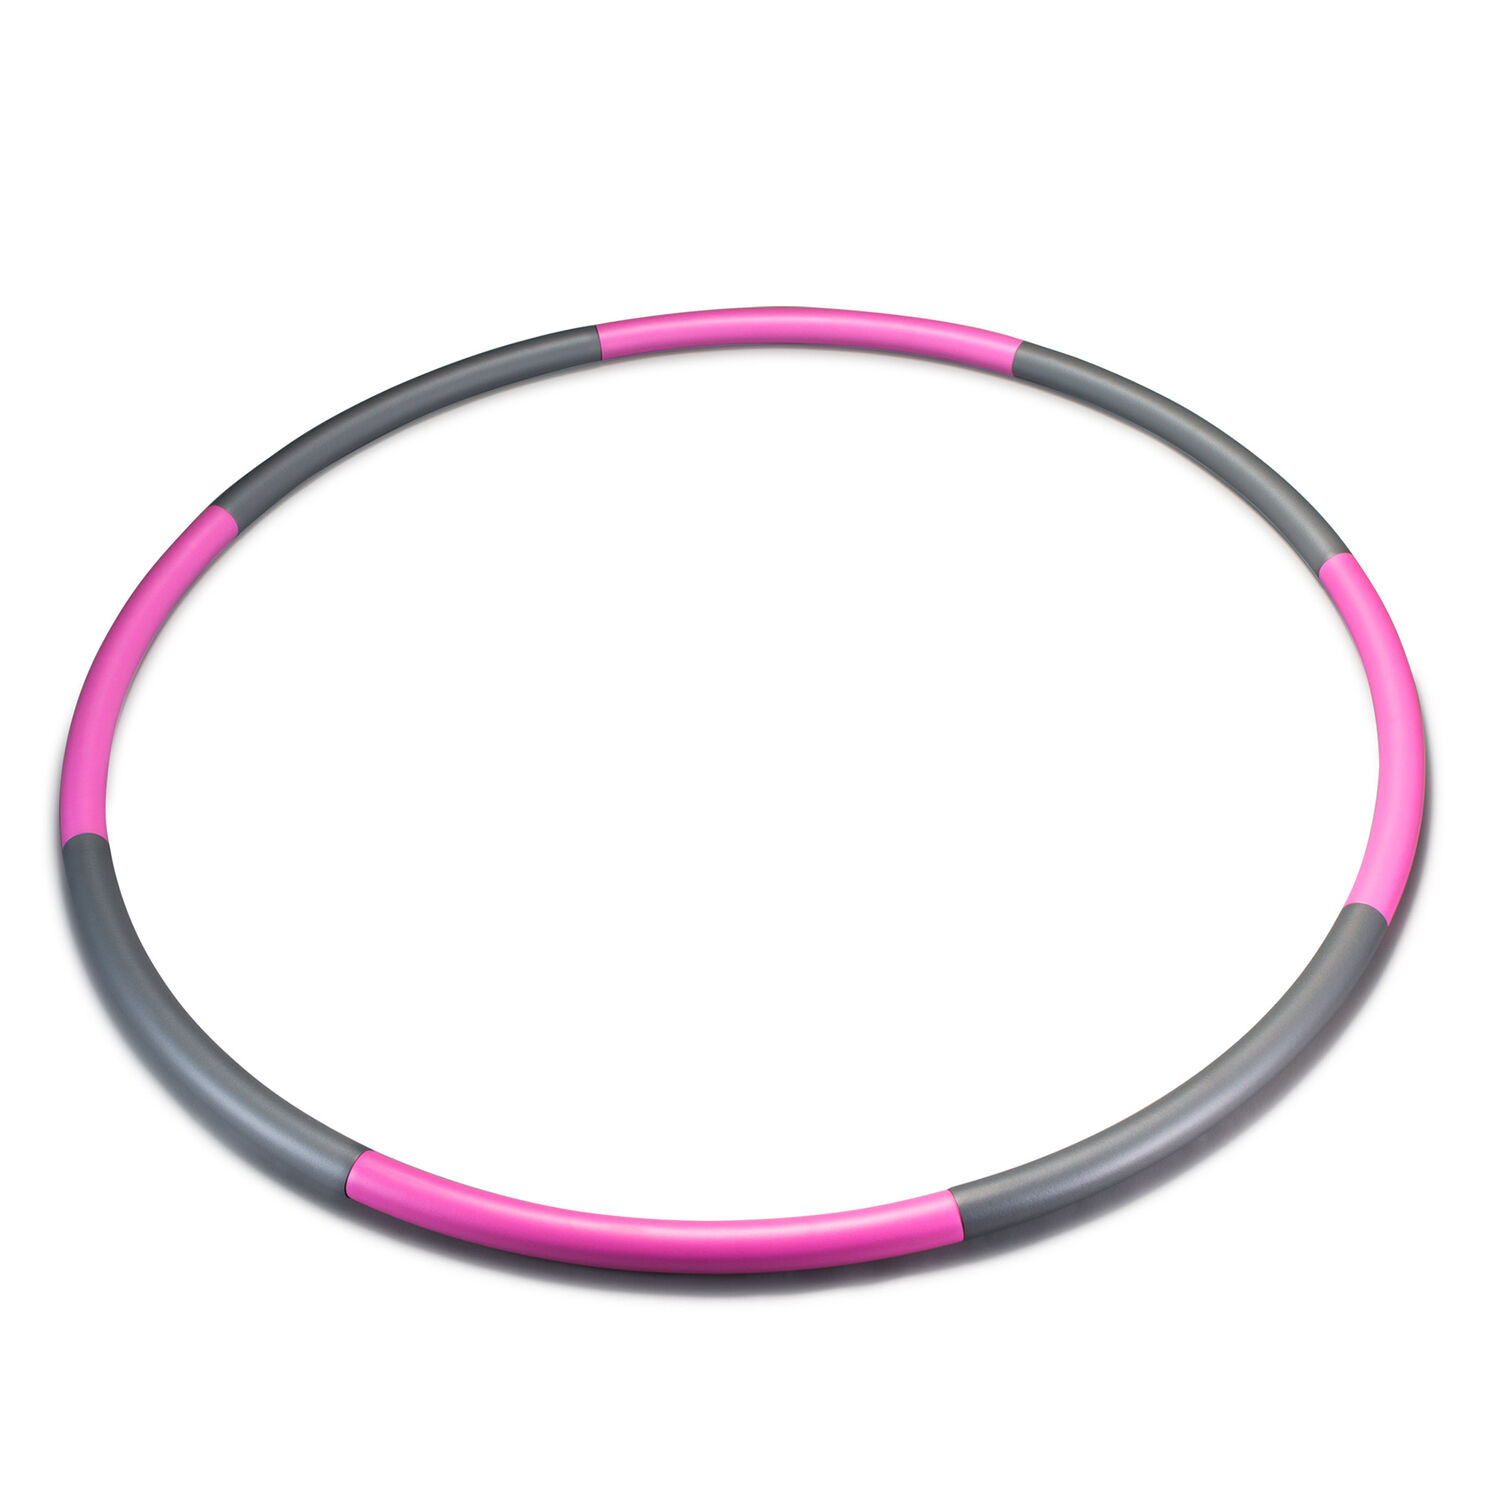 Weighted Hula Hoop ®, Shop Online & Save